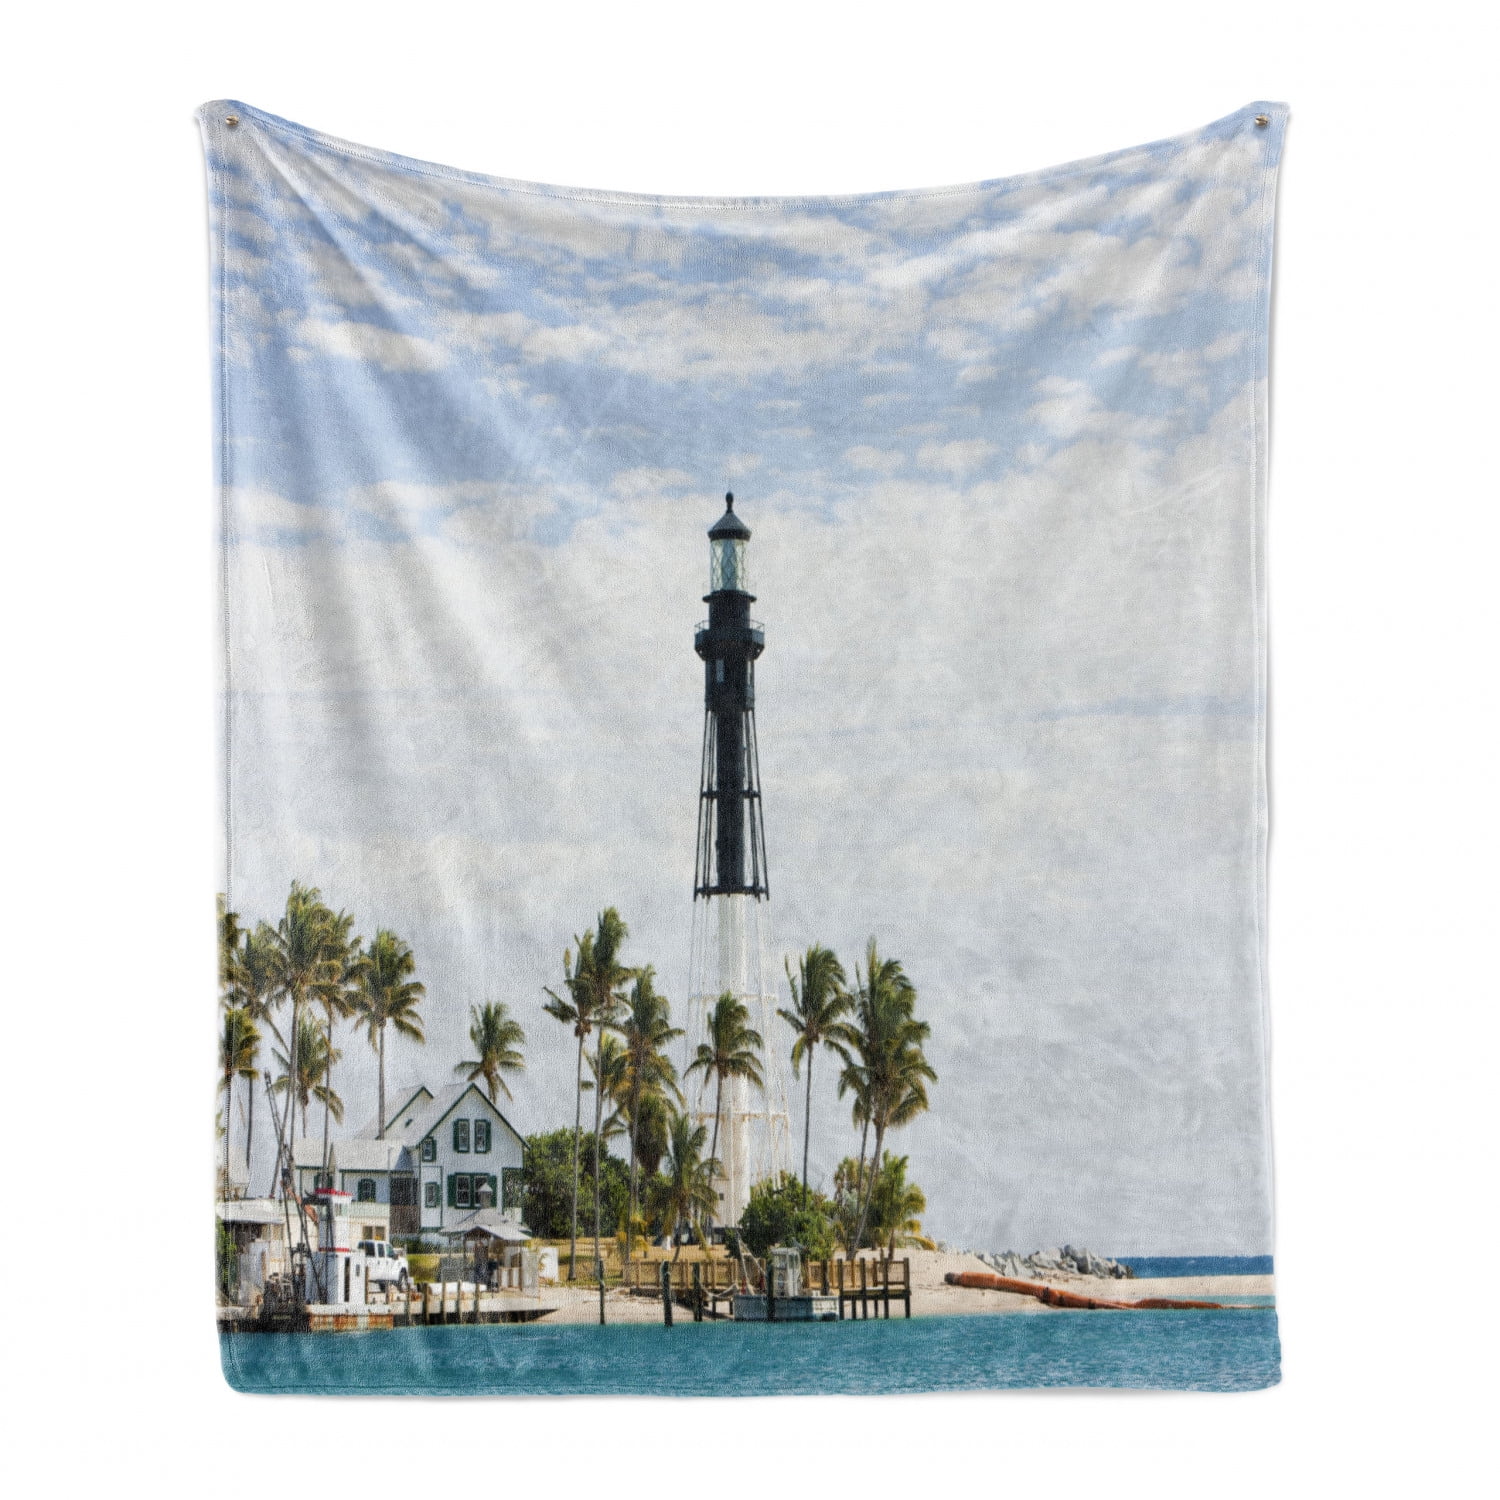 Quilted Lighthouse Throw Blanket 60x50 Valentine's Day Gifts for Wife Mom Her 